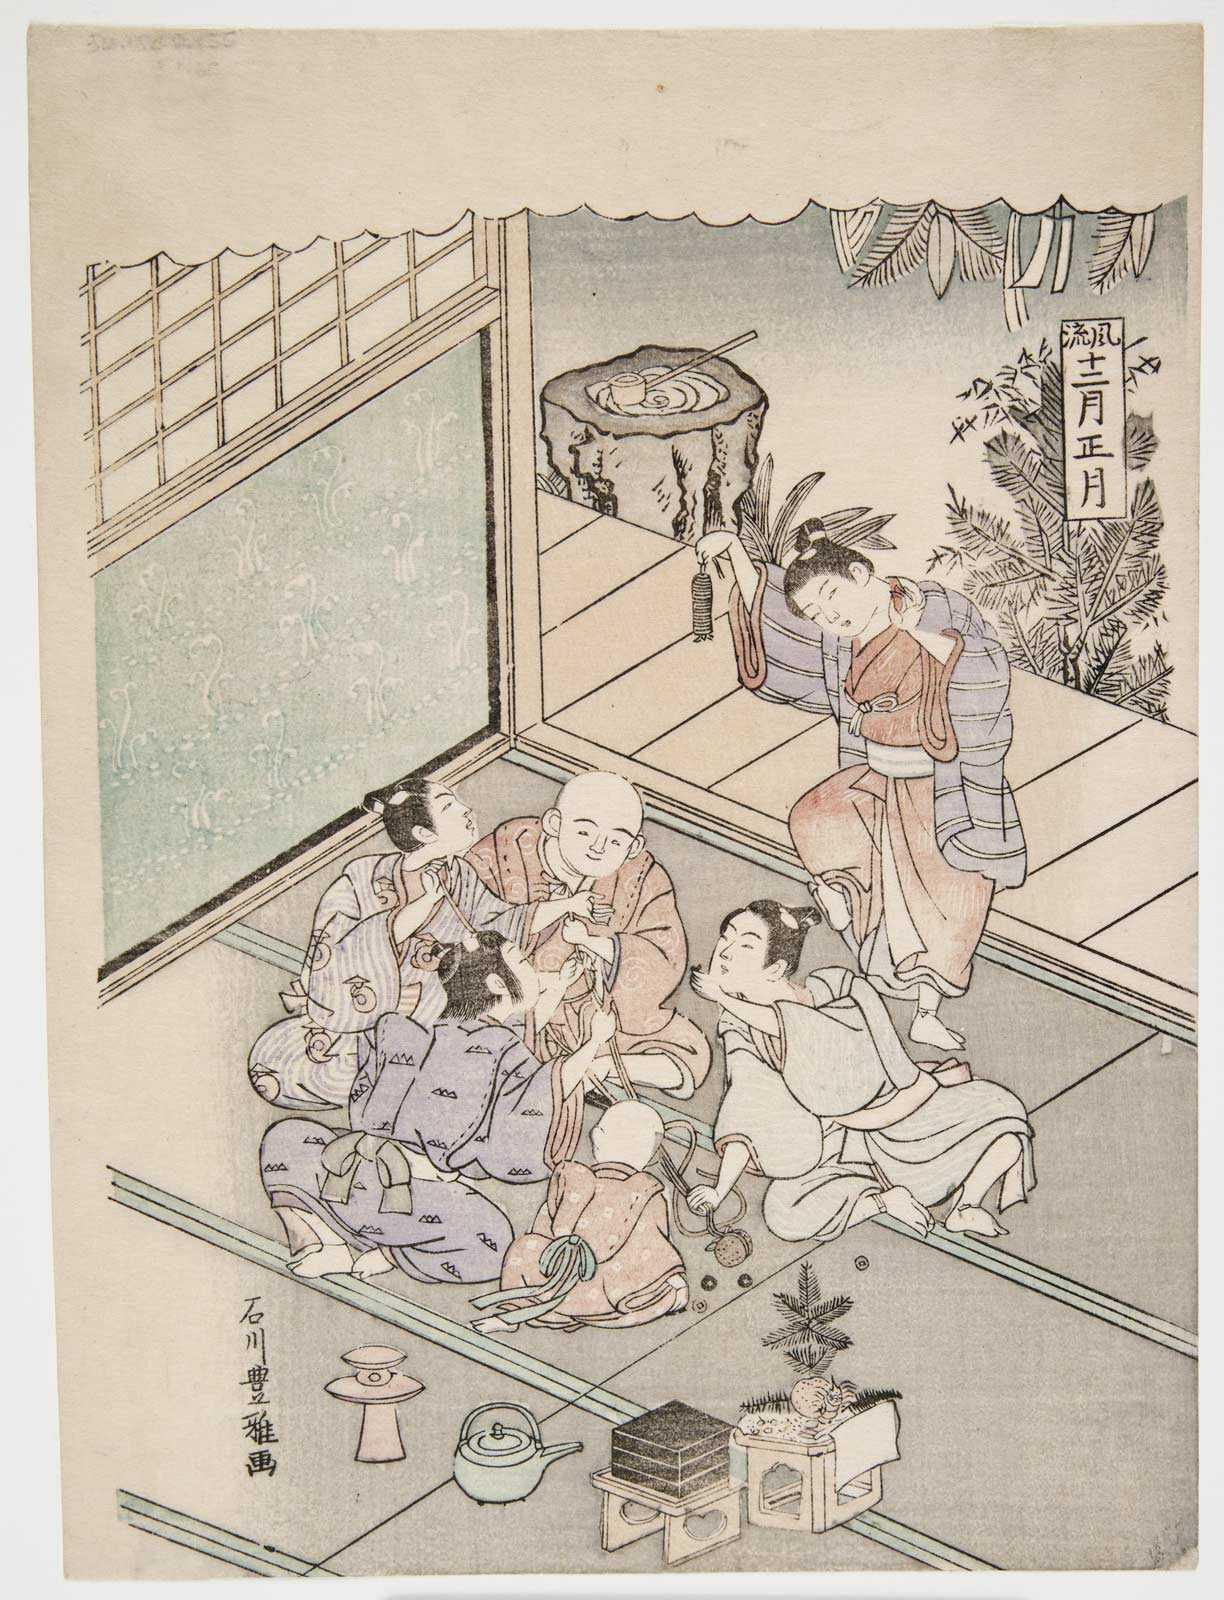 A Japanese print from the Wriston collection.